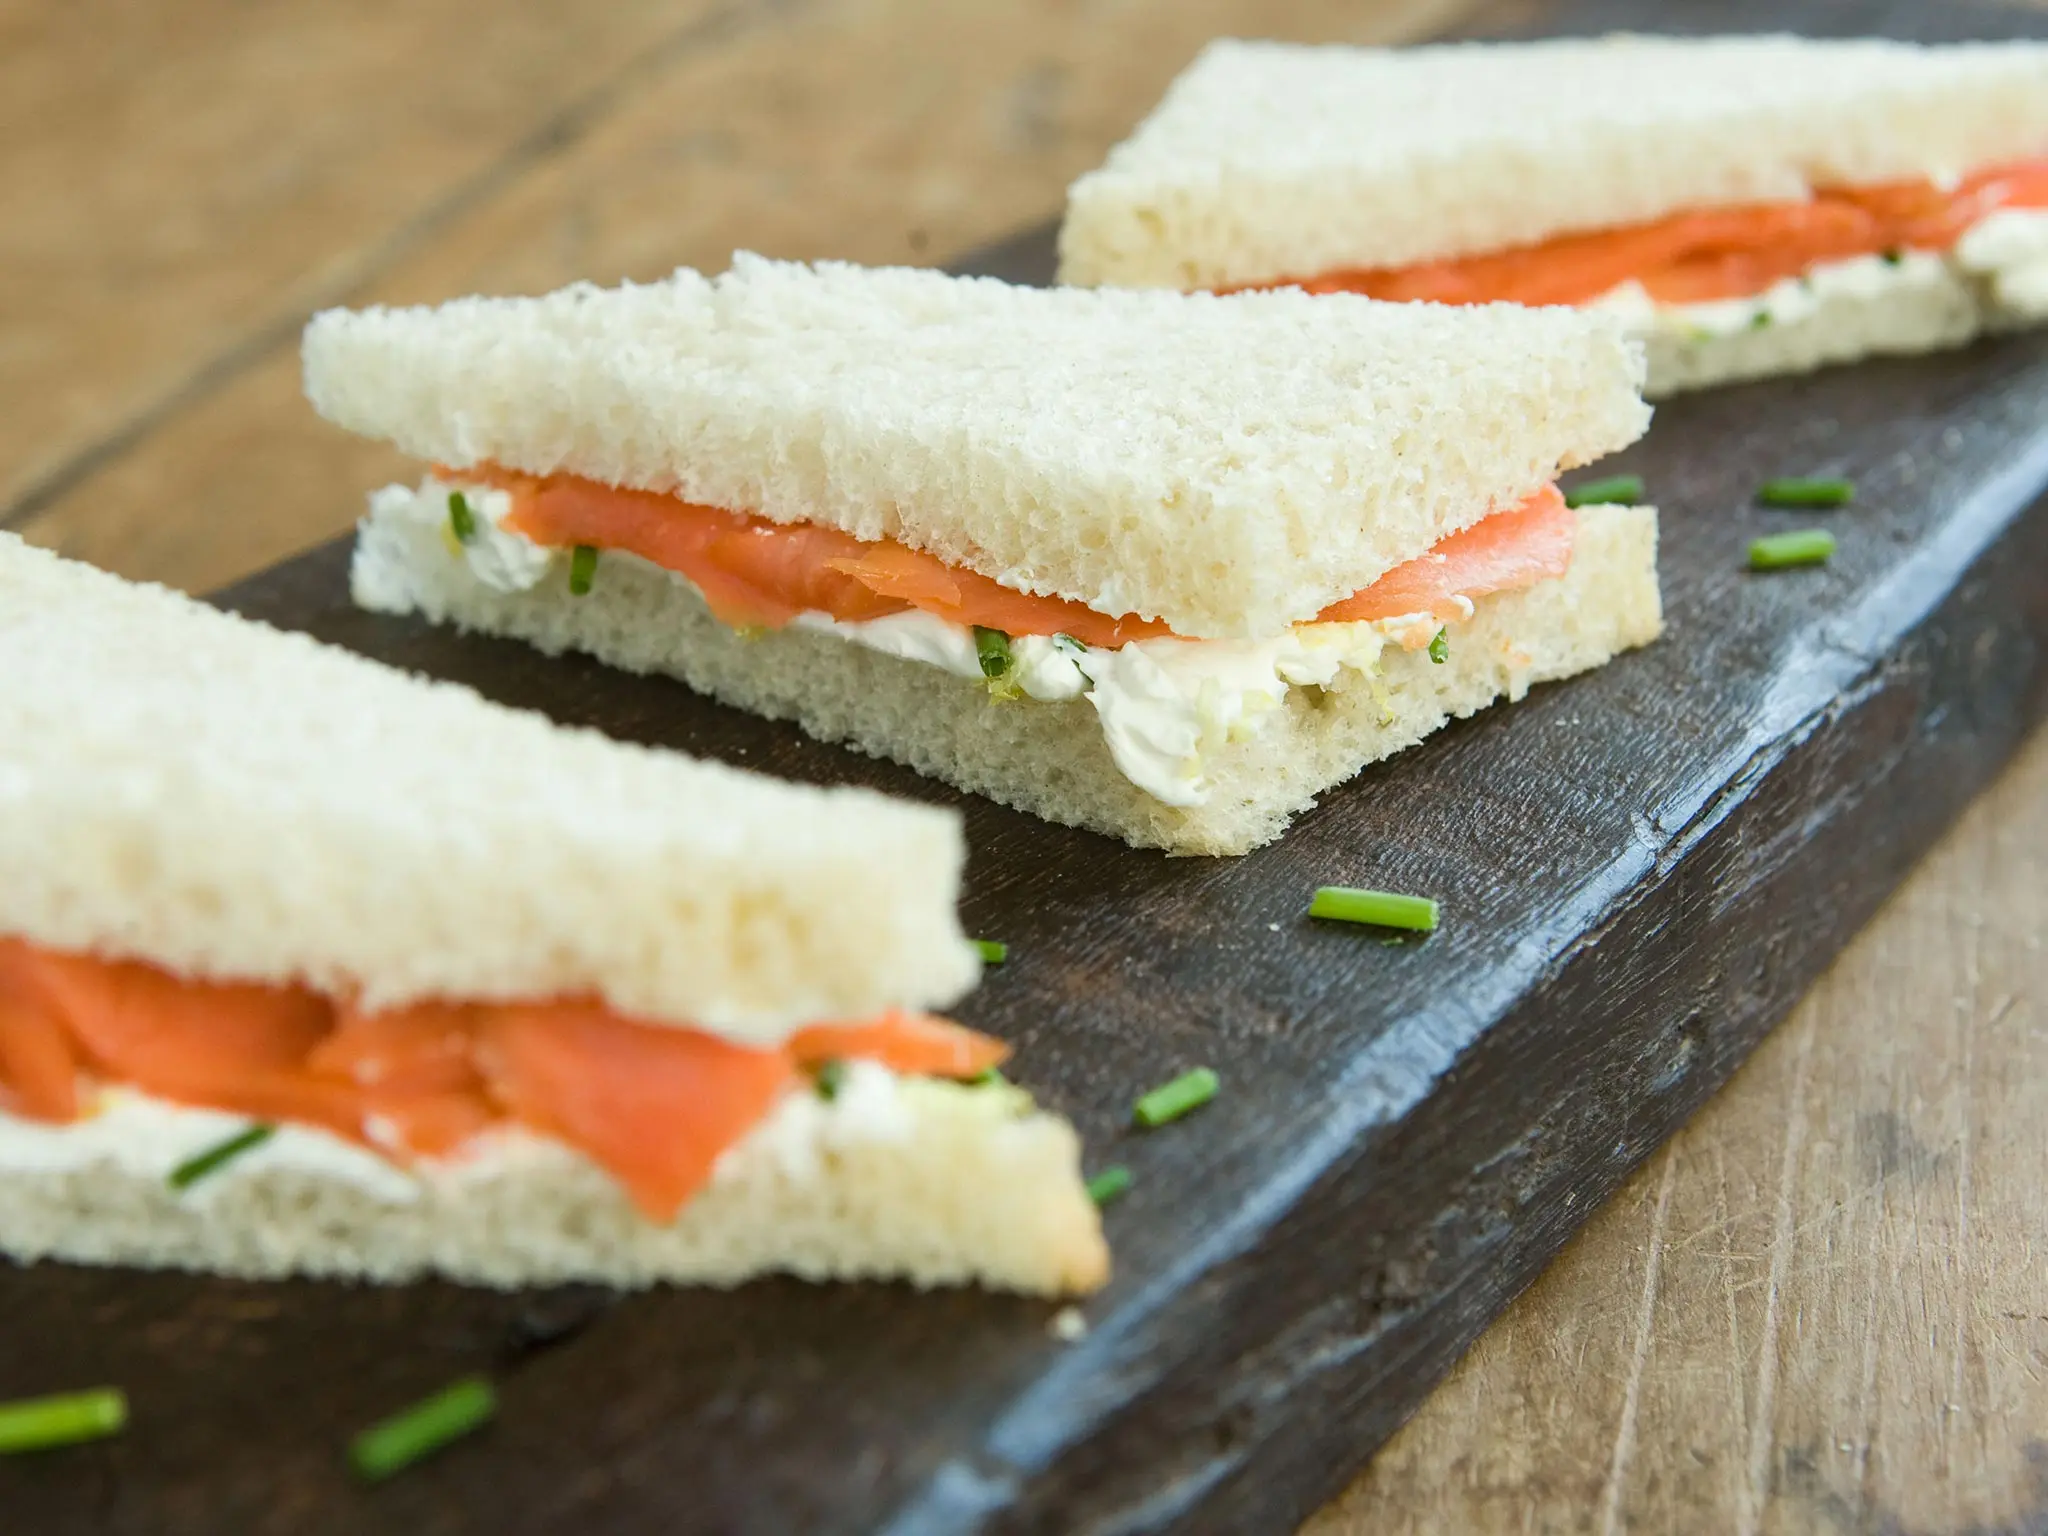 calories in smoked salmon sandwich with cream cheese - How many calories are in smoked salmon cream cheese